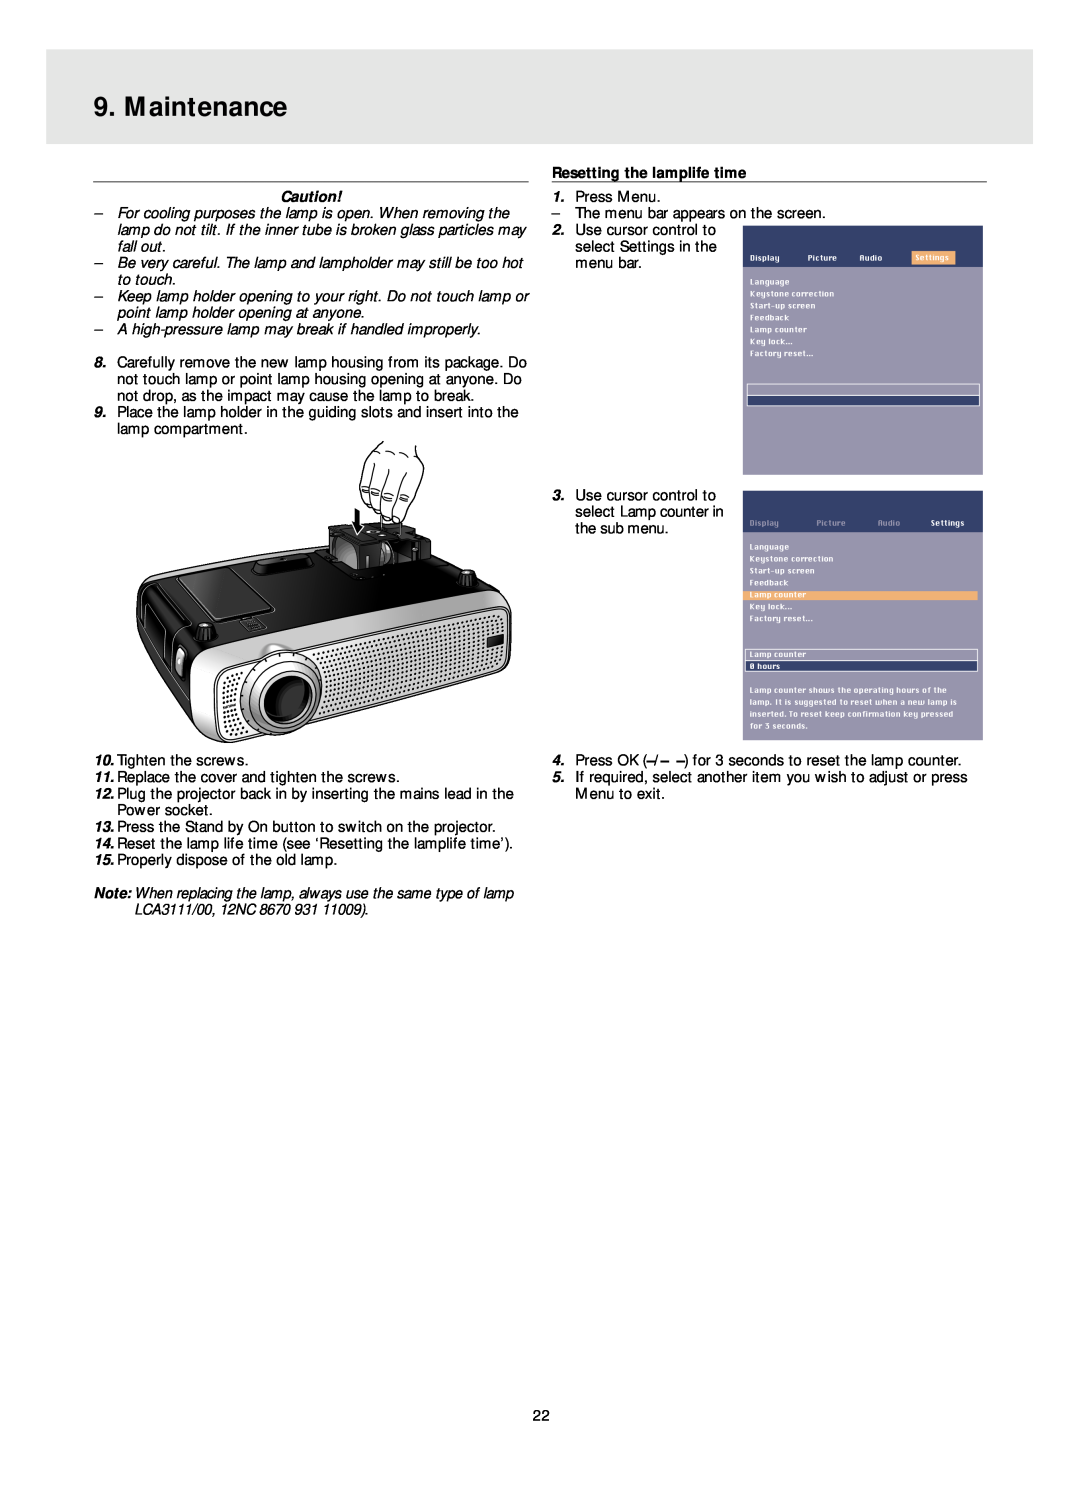 Philips LC4345, LC4331 Maintenance, Resetting the lamplife time, Use cursor control to, select Settings in the, menu bar 